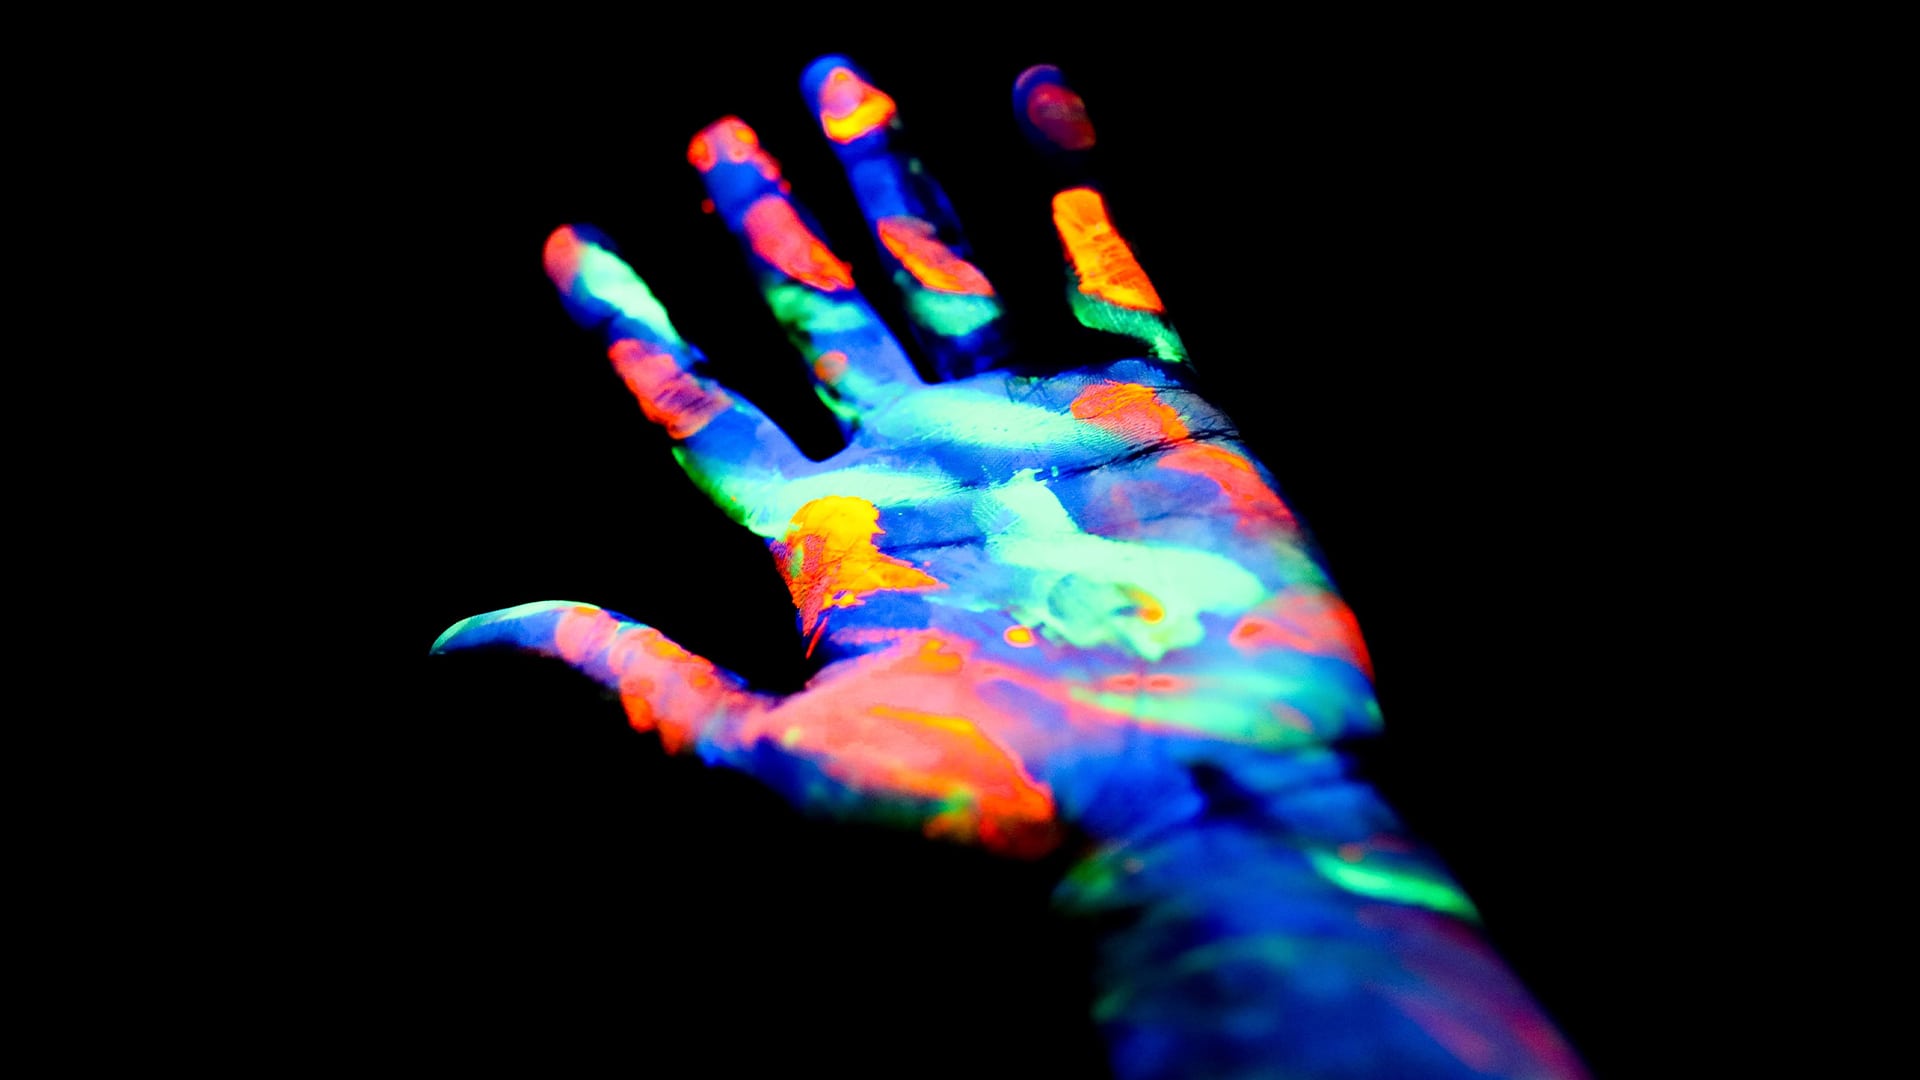 Human hand with palm up painted colorfully.